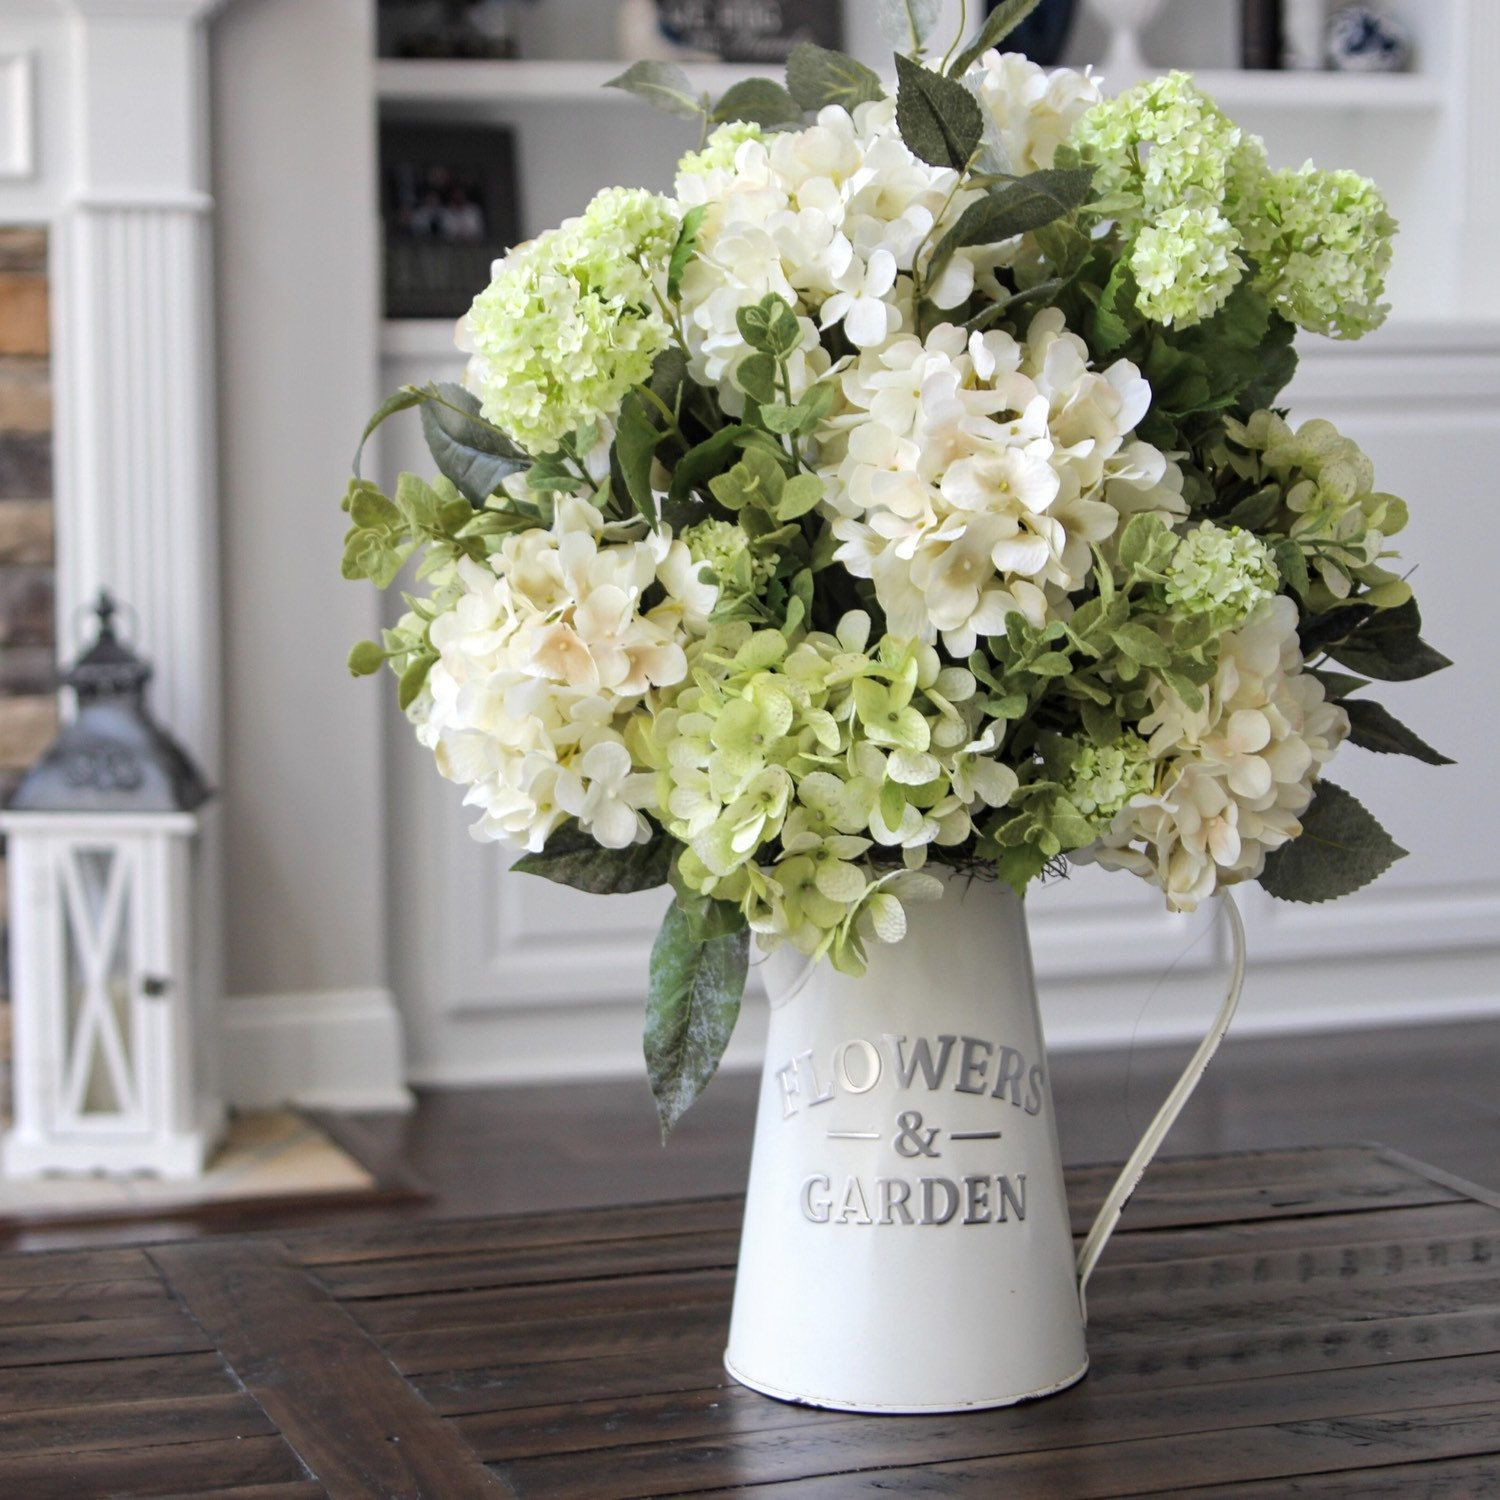 10 Nice White Pitcher Vase with Flowers 2023 free download white pitcher vase with flowers of hydrangeas in a white metal pitcher so pretty florals pinterest throughout hydrangeas in a white metal pitcher so pretty